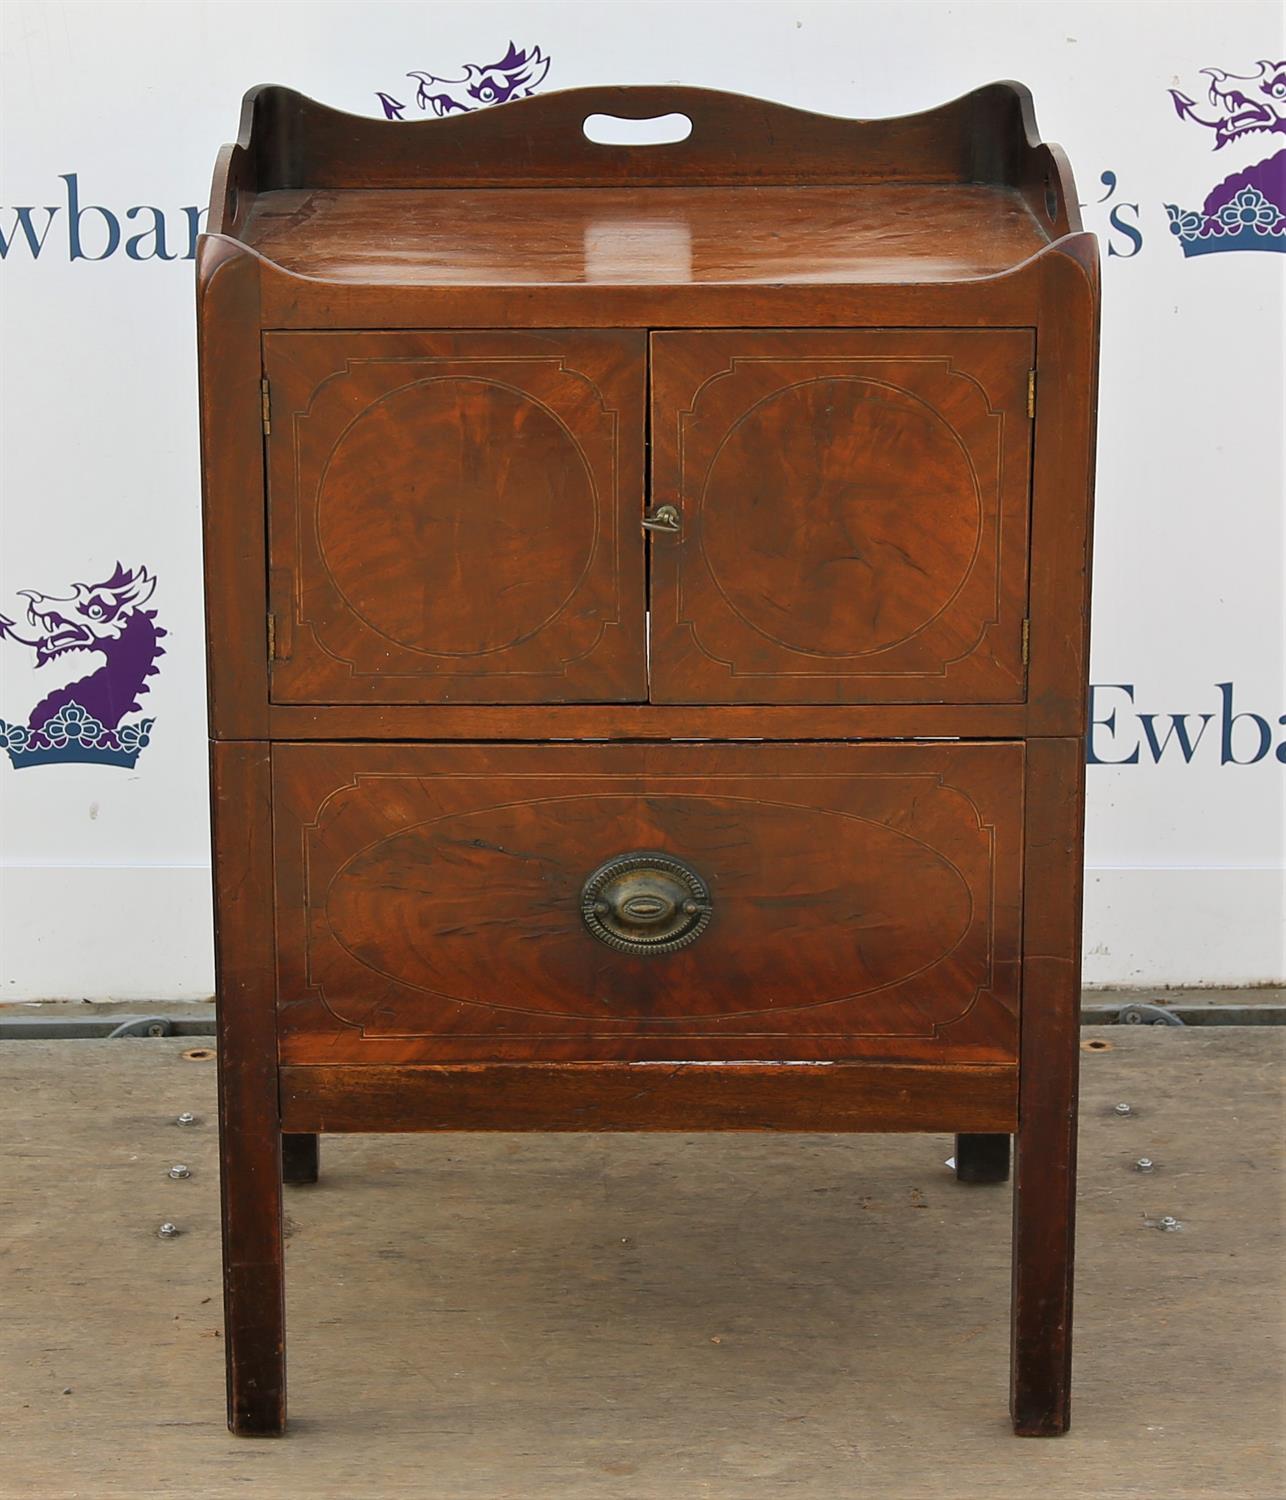 Travel trunk, 26 x 84 x 53 cm, mahogany commode and Victorian style button back armchair with - Image 2 of 2